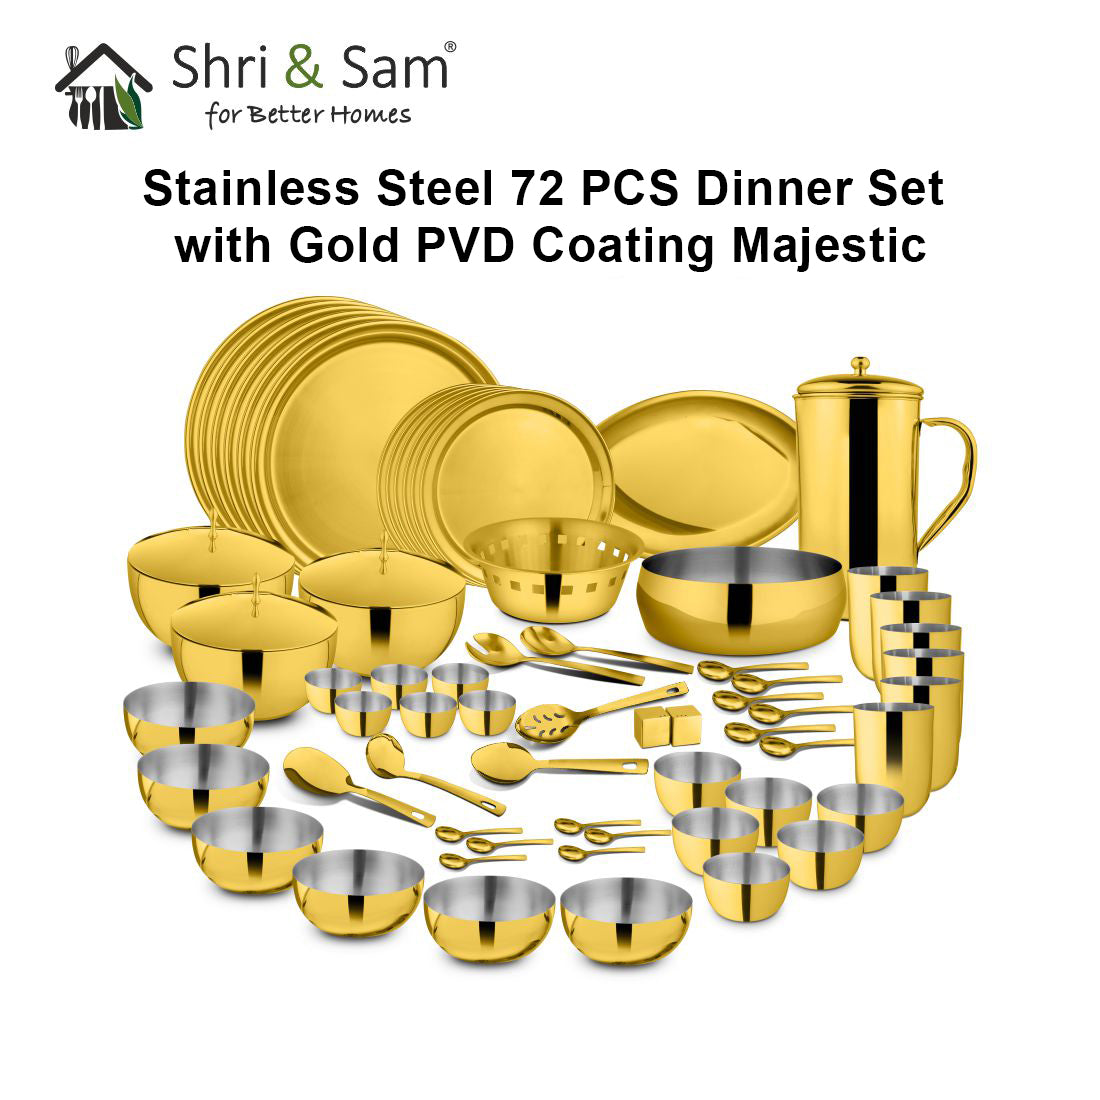 Stainless Steel 72 PCS Dinner Set (6 People) with Gold PVD Coating Majestic